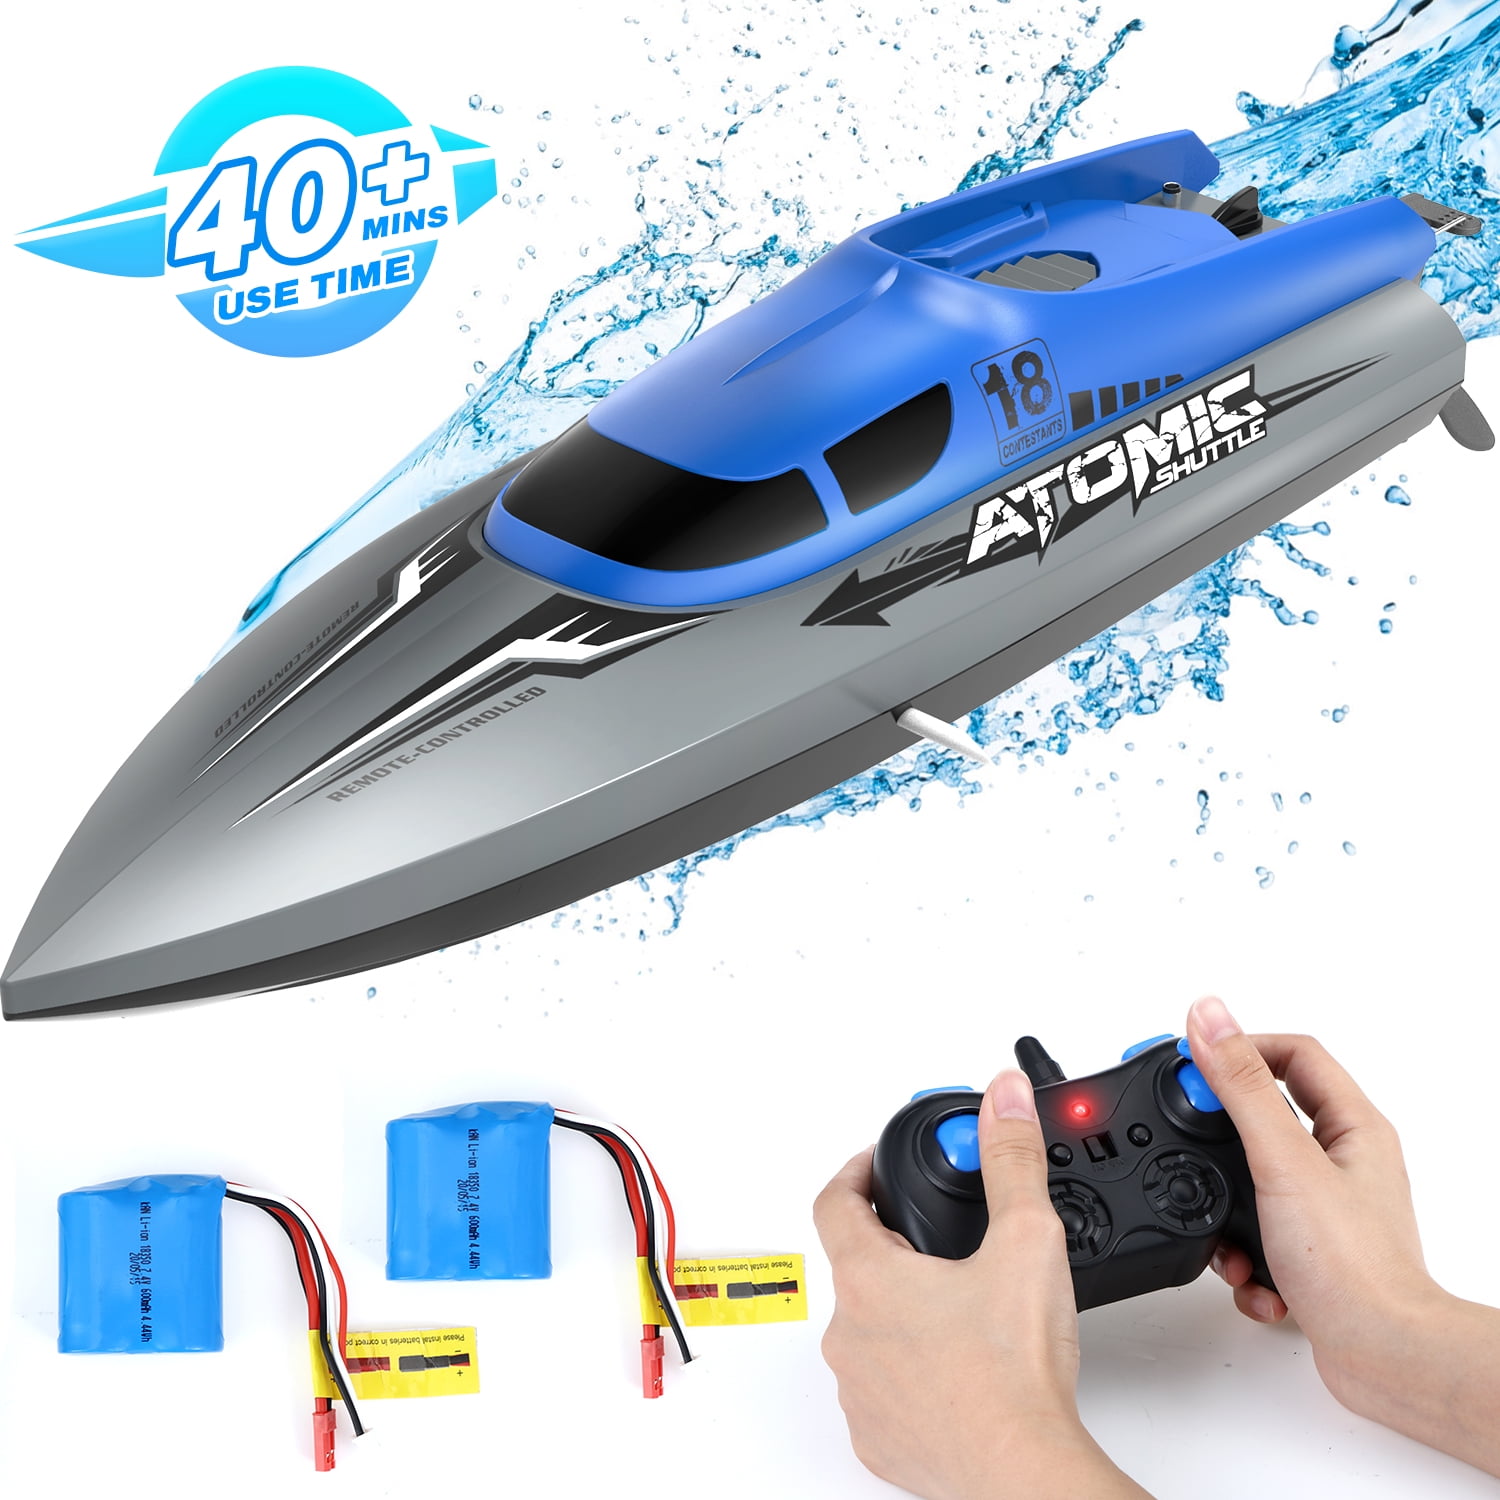 Details about   Contixo T1 with Remote Control Racing Speedboat Red New 